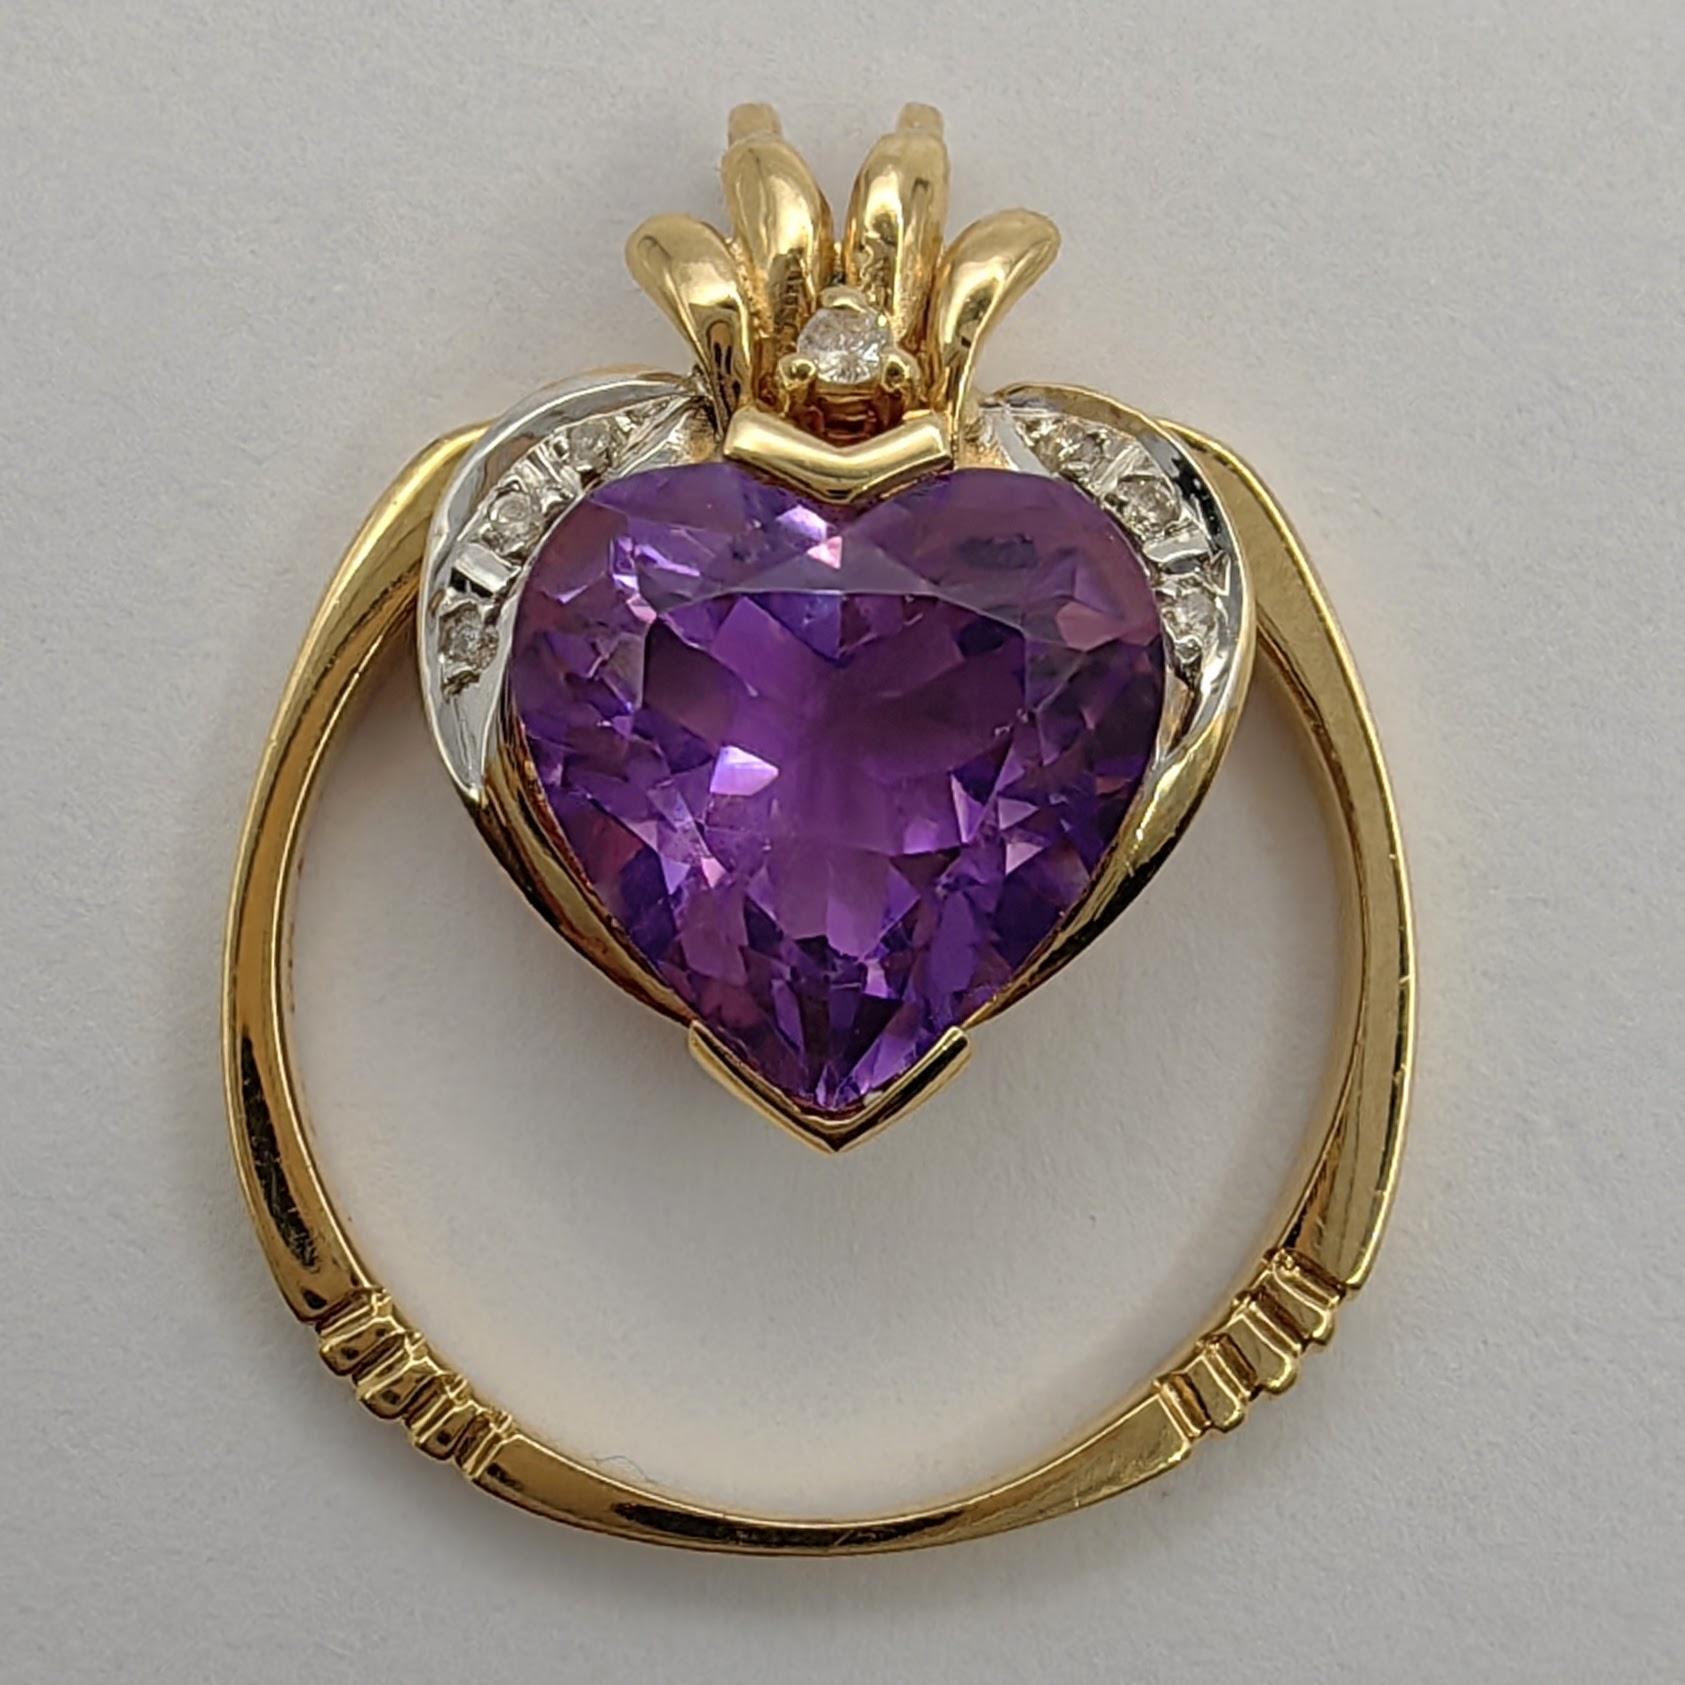 Introducing our exquisite Natural Heart-cut Amethyst Diamond Two-Tone Ring & Pendant in 14K Gold, a versatile and captivating piece that combines the charm of a ring with the versatility of a pendant.

At the heart of this elegant creation lies a